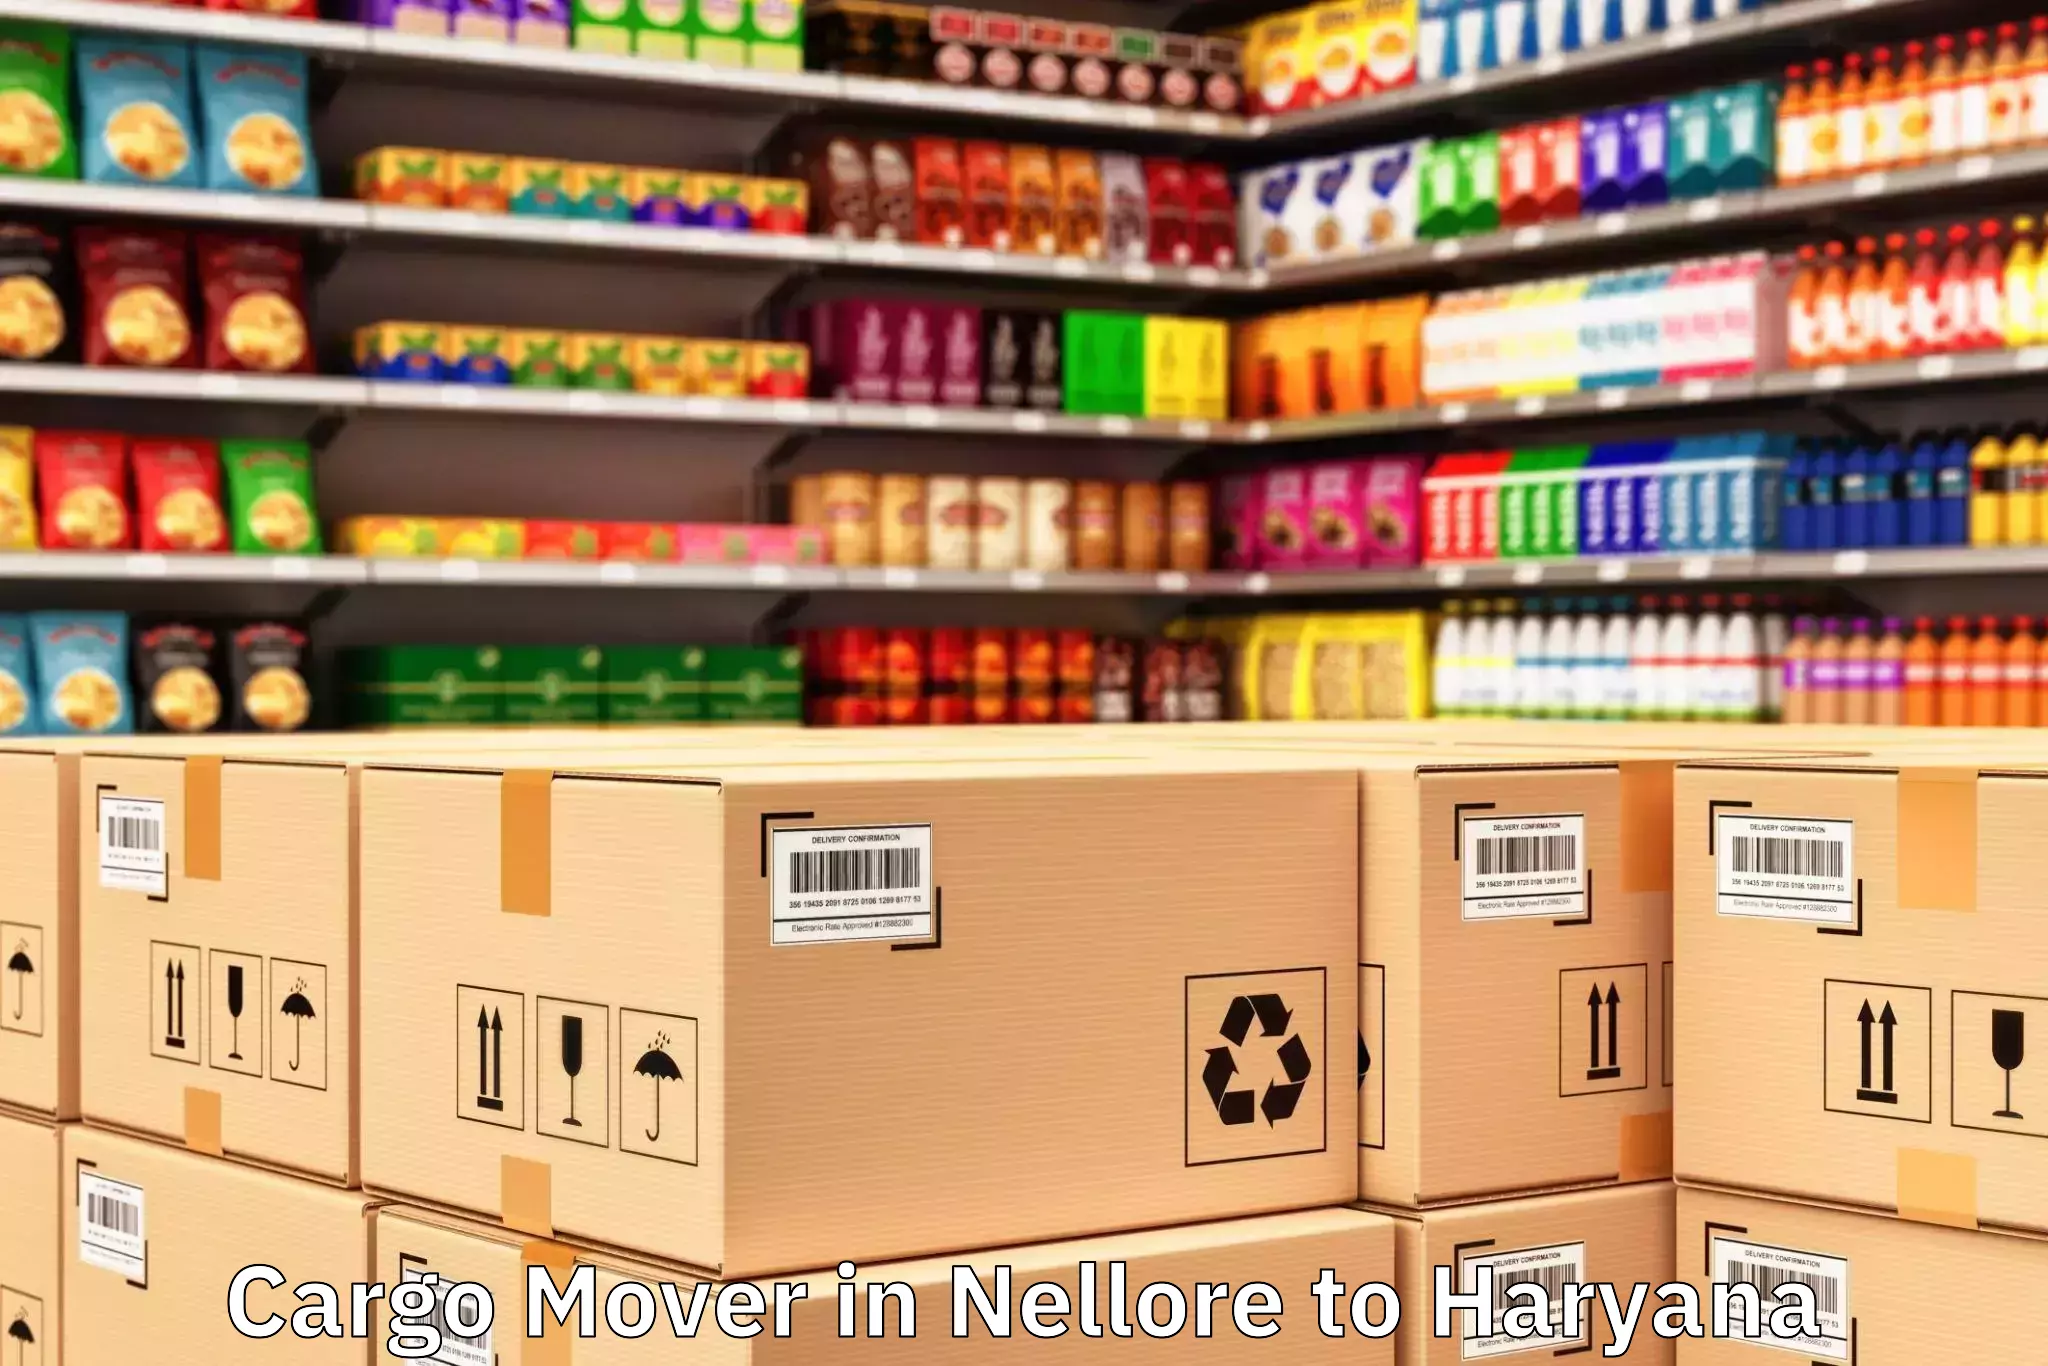 Nellore to Gold Souk Mall Gurgaon Cargo Mover Booking